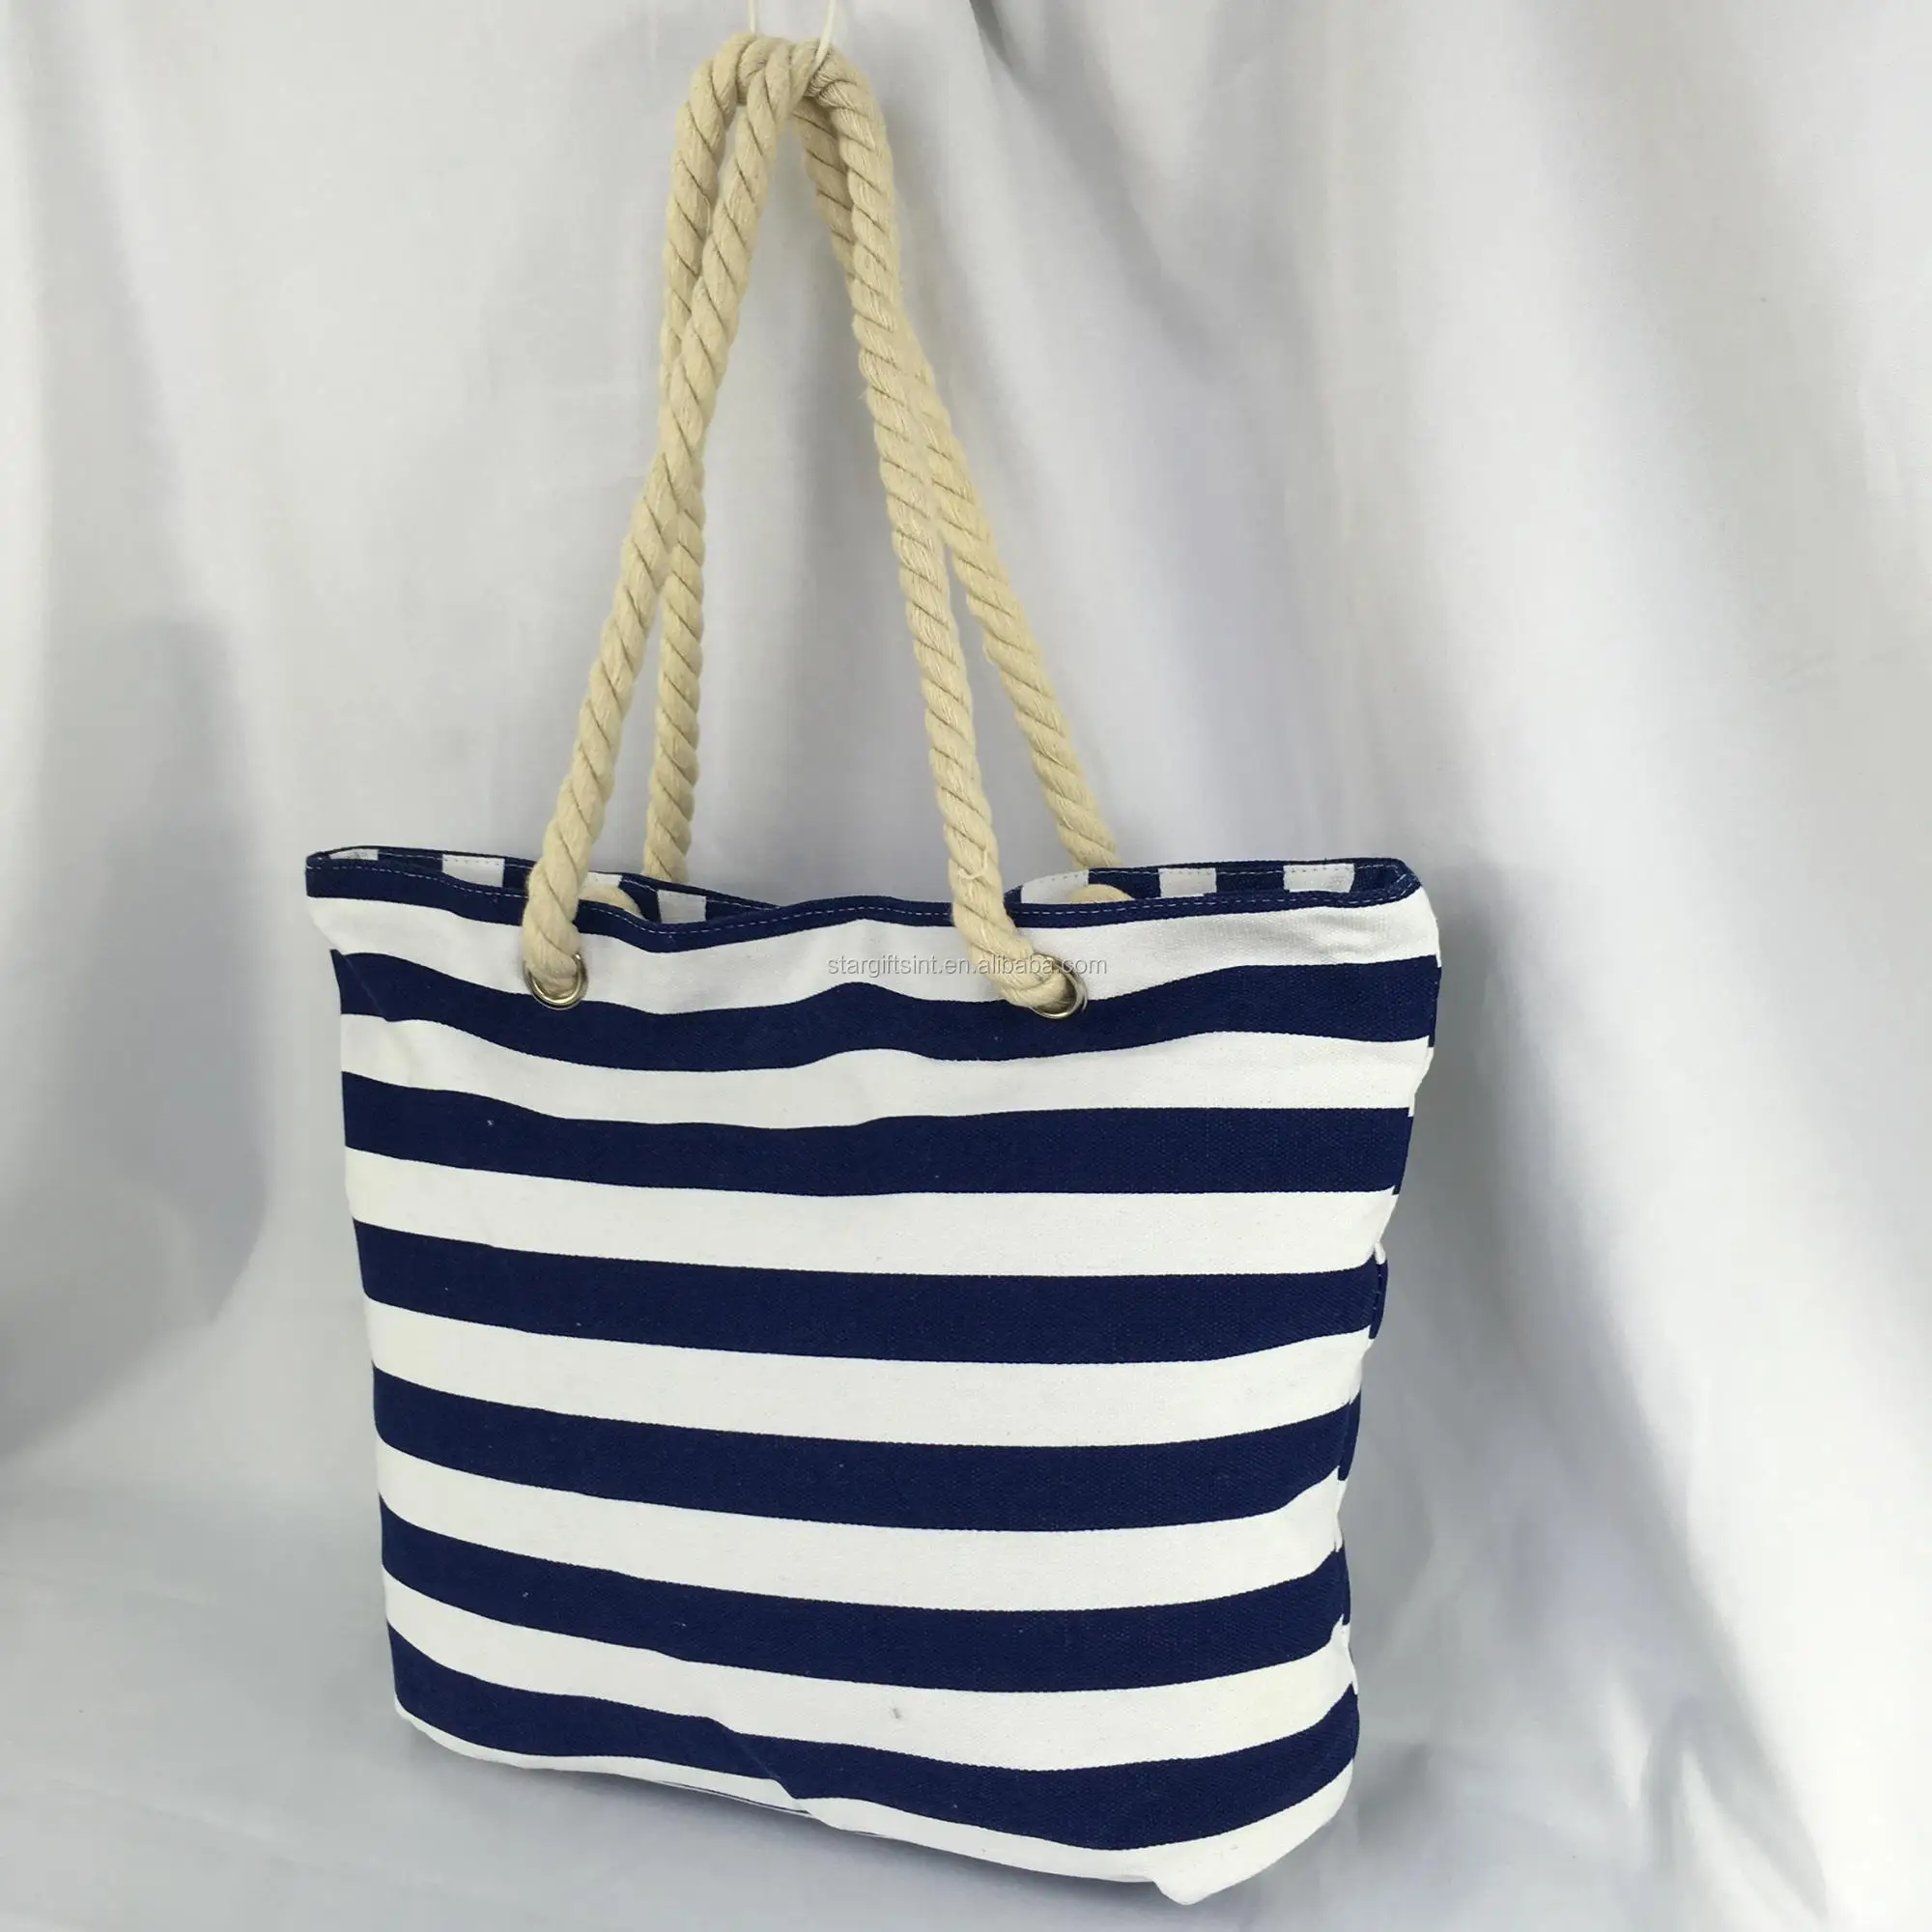 China Supplier Wholesale Cheap Blue Cotton Lady Hand Bag - Buy Hand Bag ...